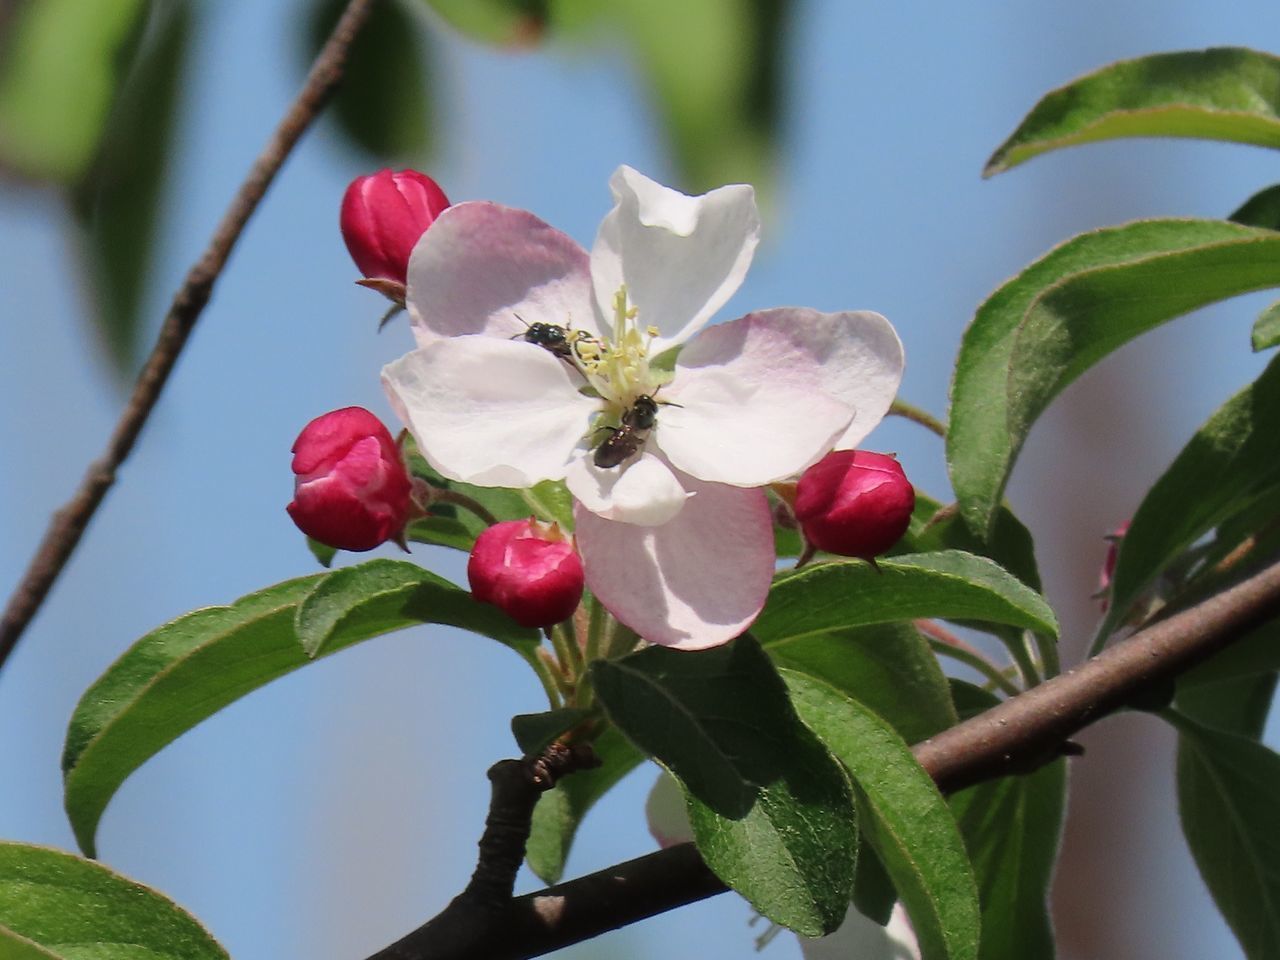 CLOSE-UP OF FRESH PINK FLOWERING PLANT AGAINST TREE